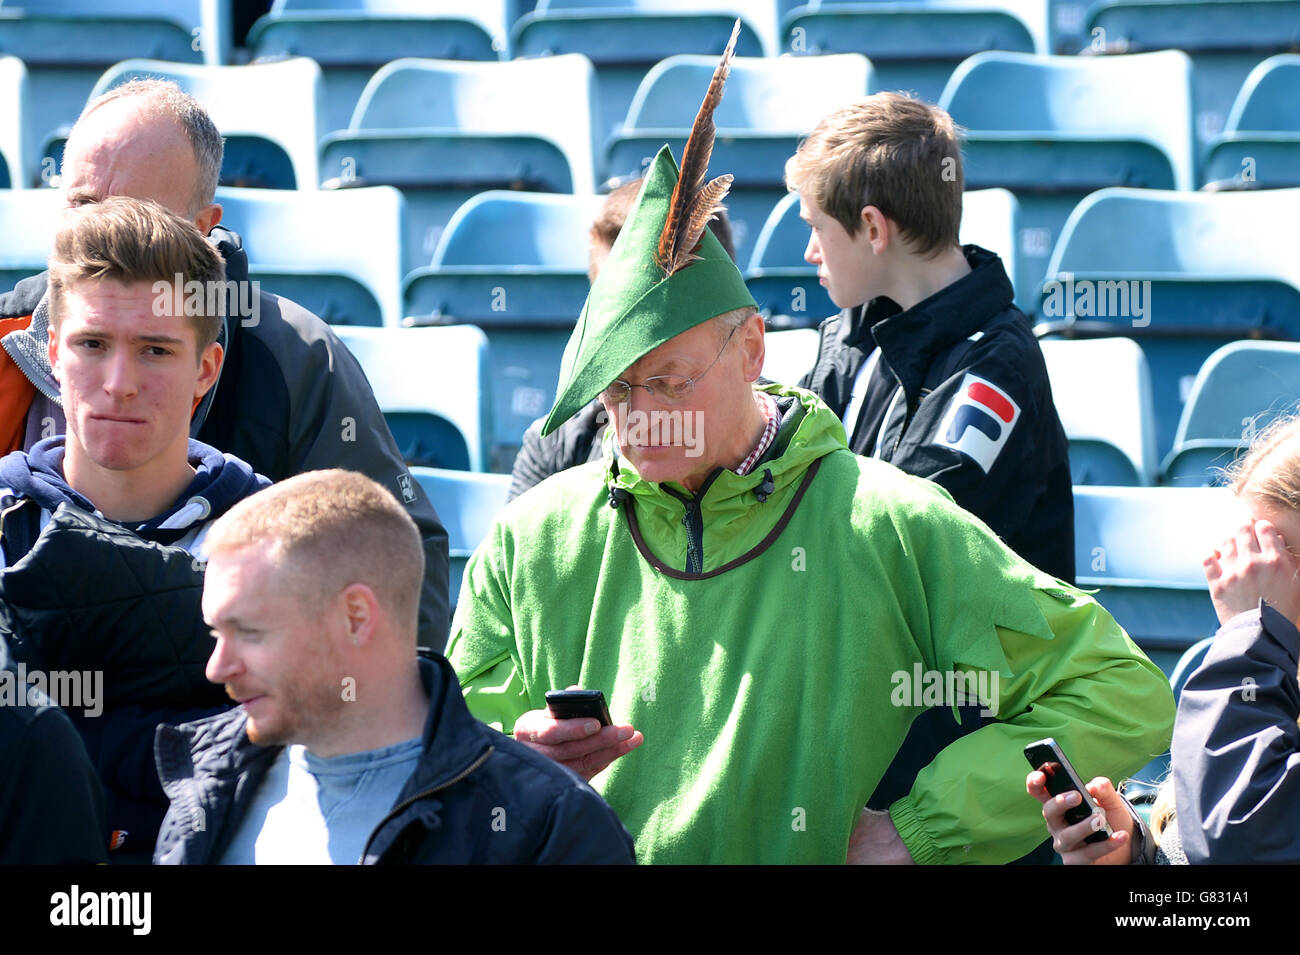 Soccer - Sky Bet League One - Gillingham v Notts County - Priestfield Stadium. A Notts County fan dress in a Robin Hood outfit in the stands Stock Photo